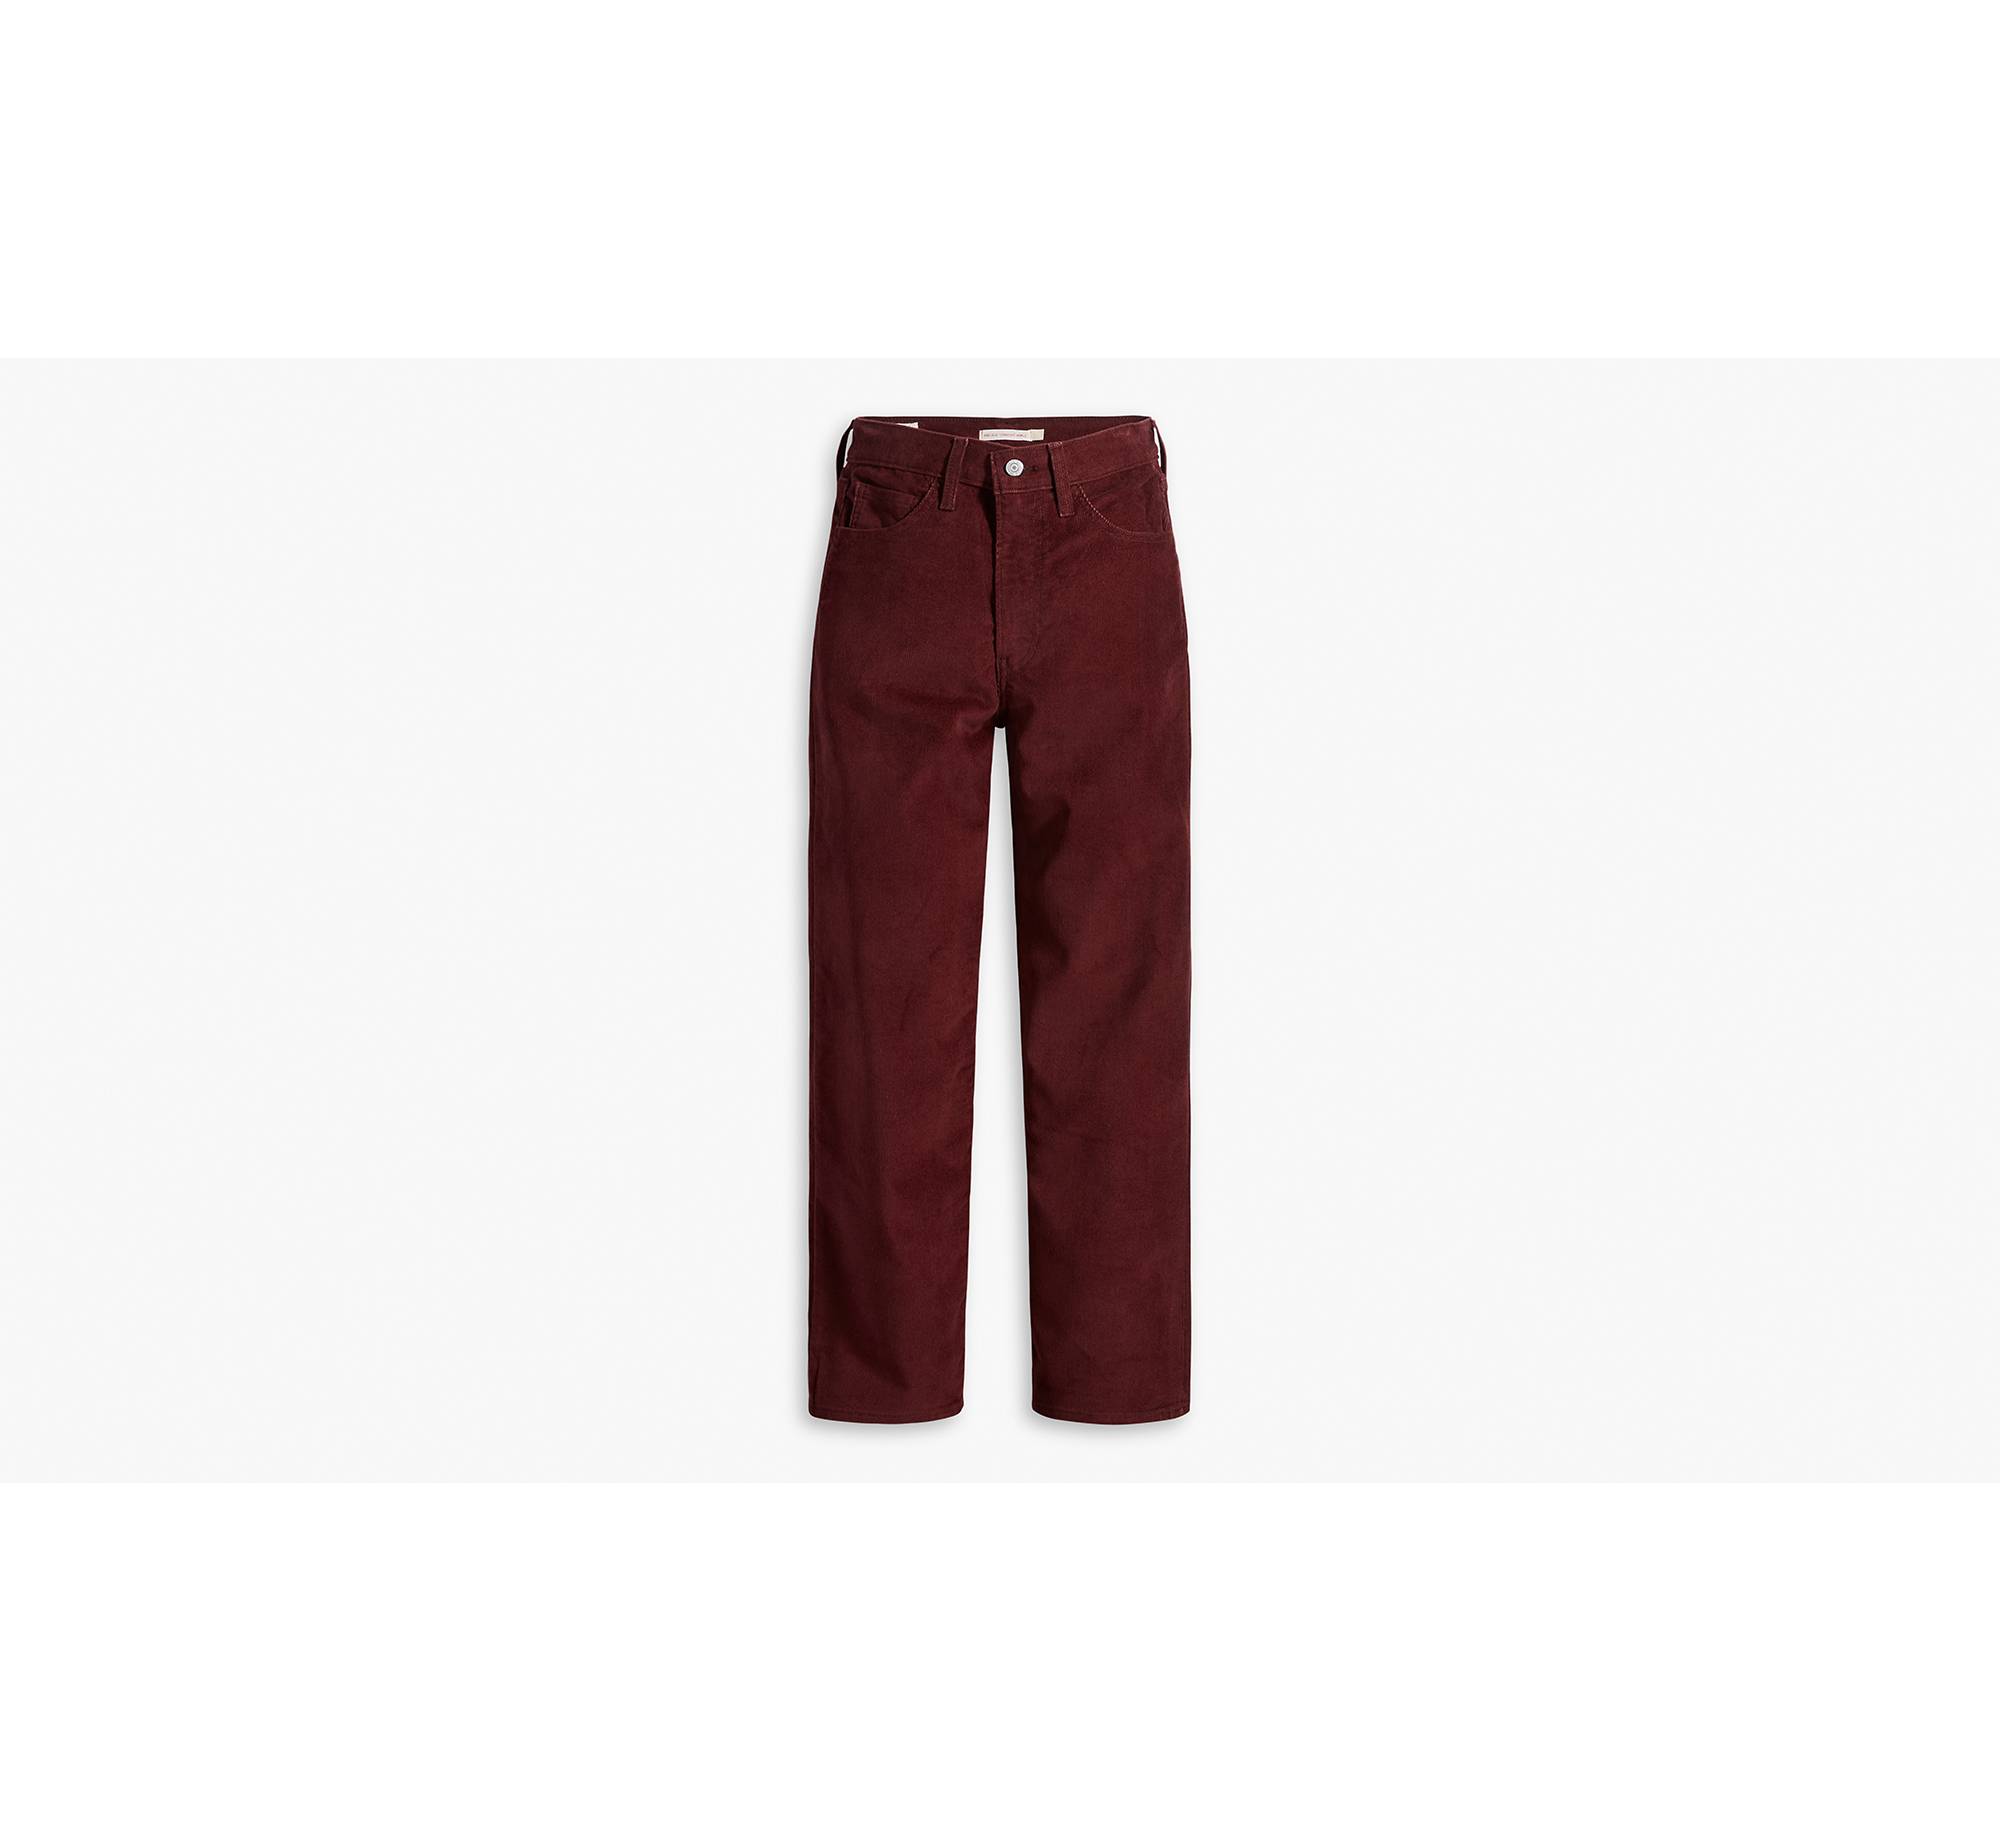 Ribcage Straight Ankle Corduroy Women's Pants - Red | Levi's® US